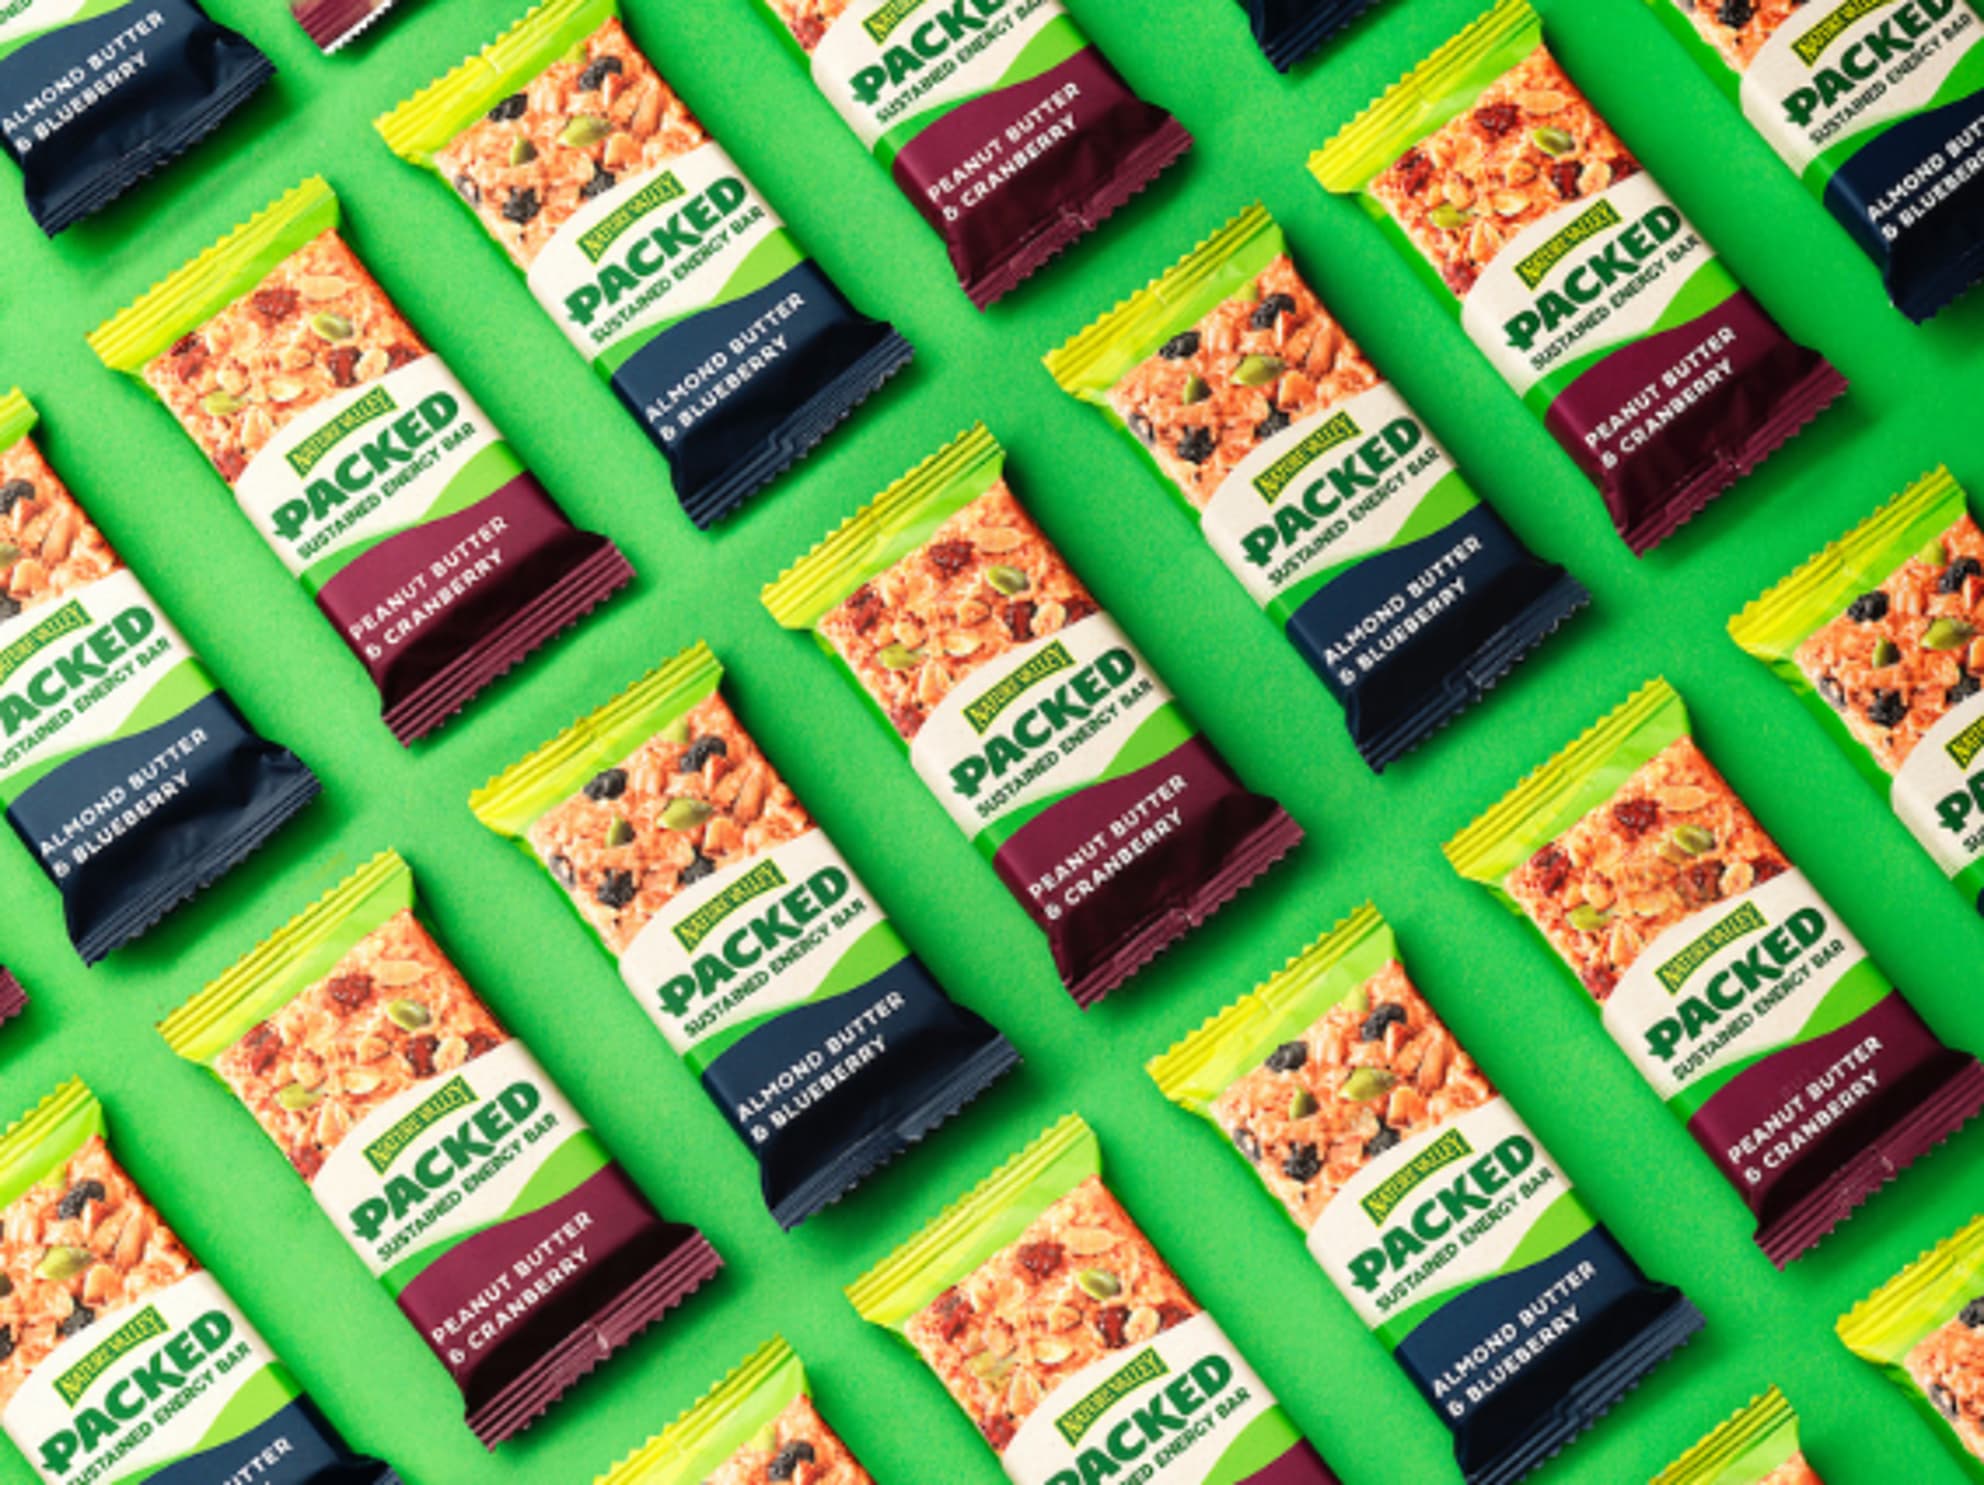 Nature Valley packed energy bars repeating